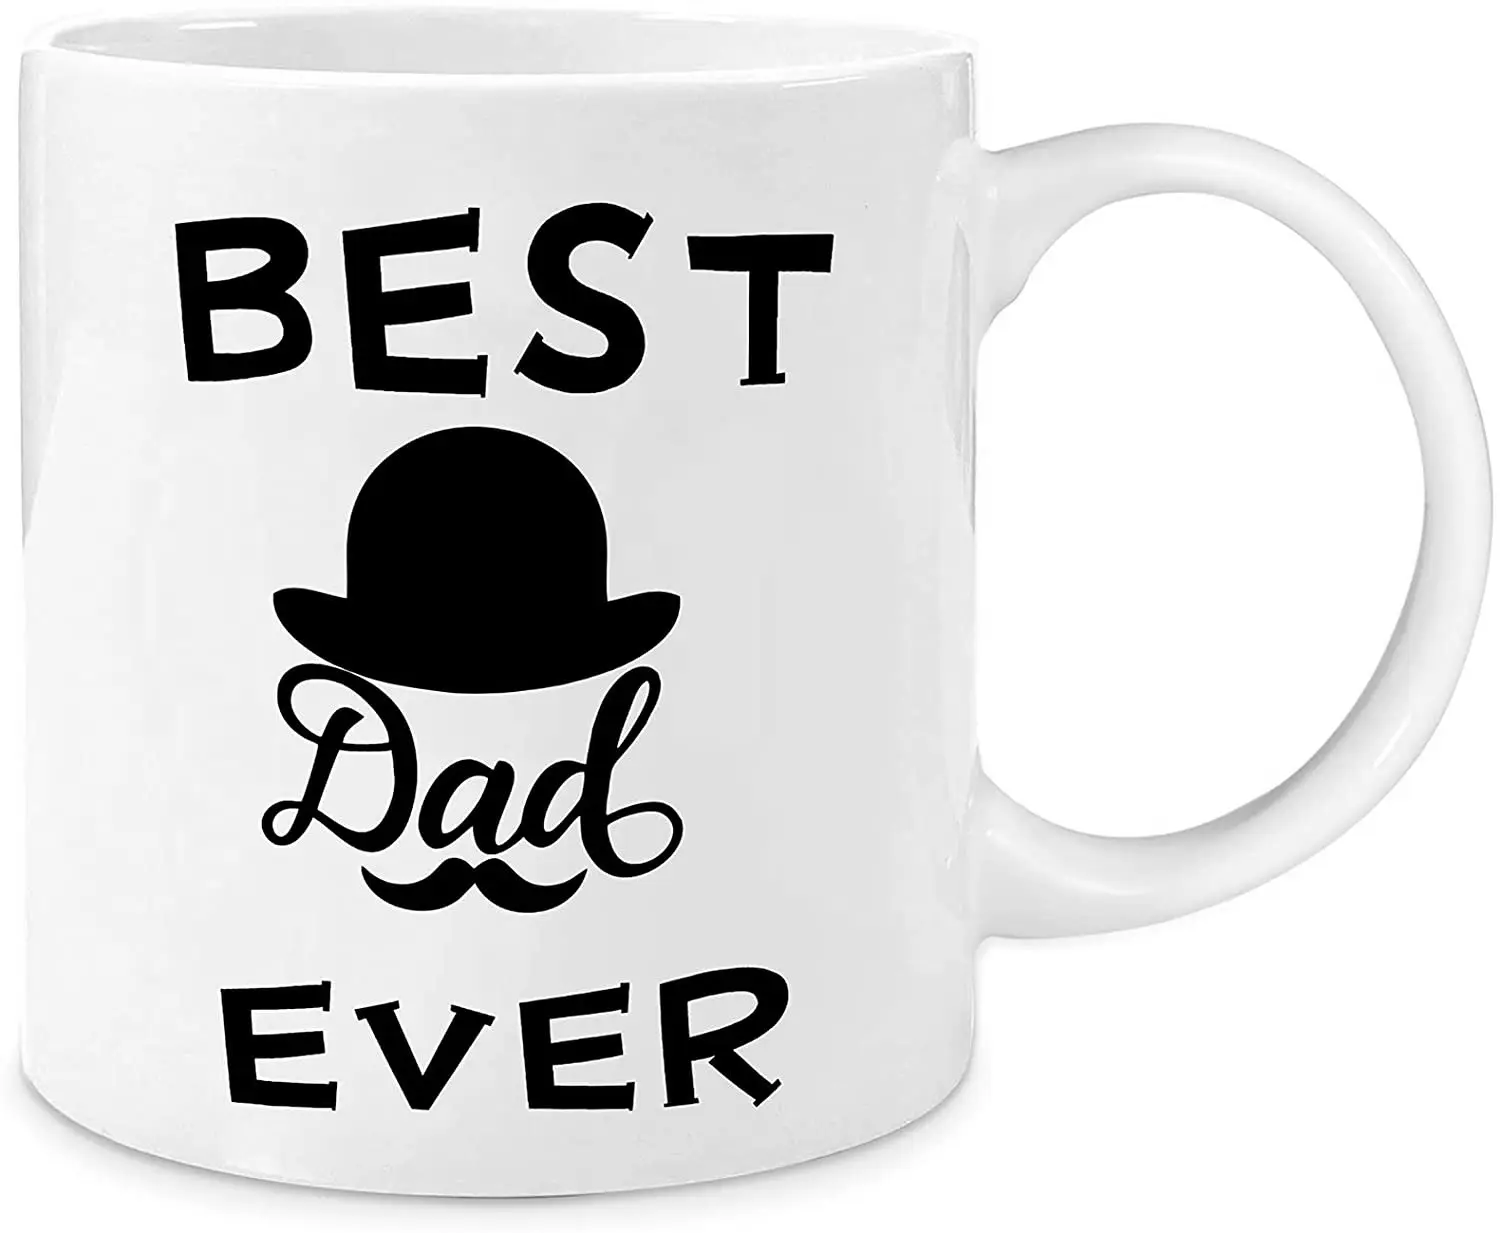 Best Dad Ever Coffee Mug Father's Day Ceramic Coffee Mug Tea Cup Customize Your Text